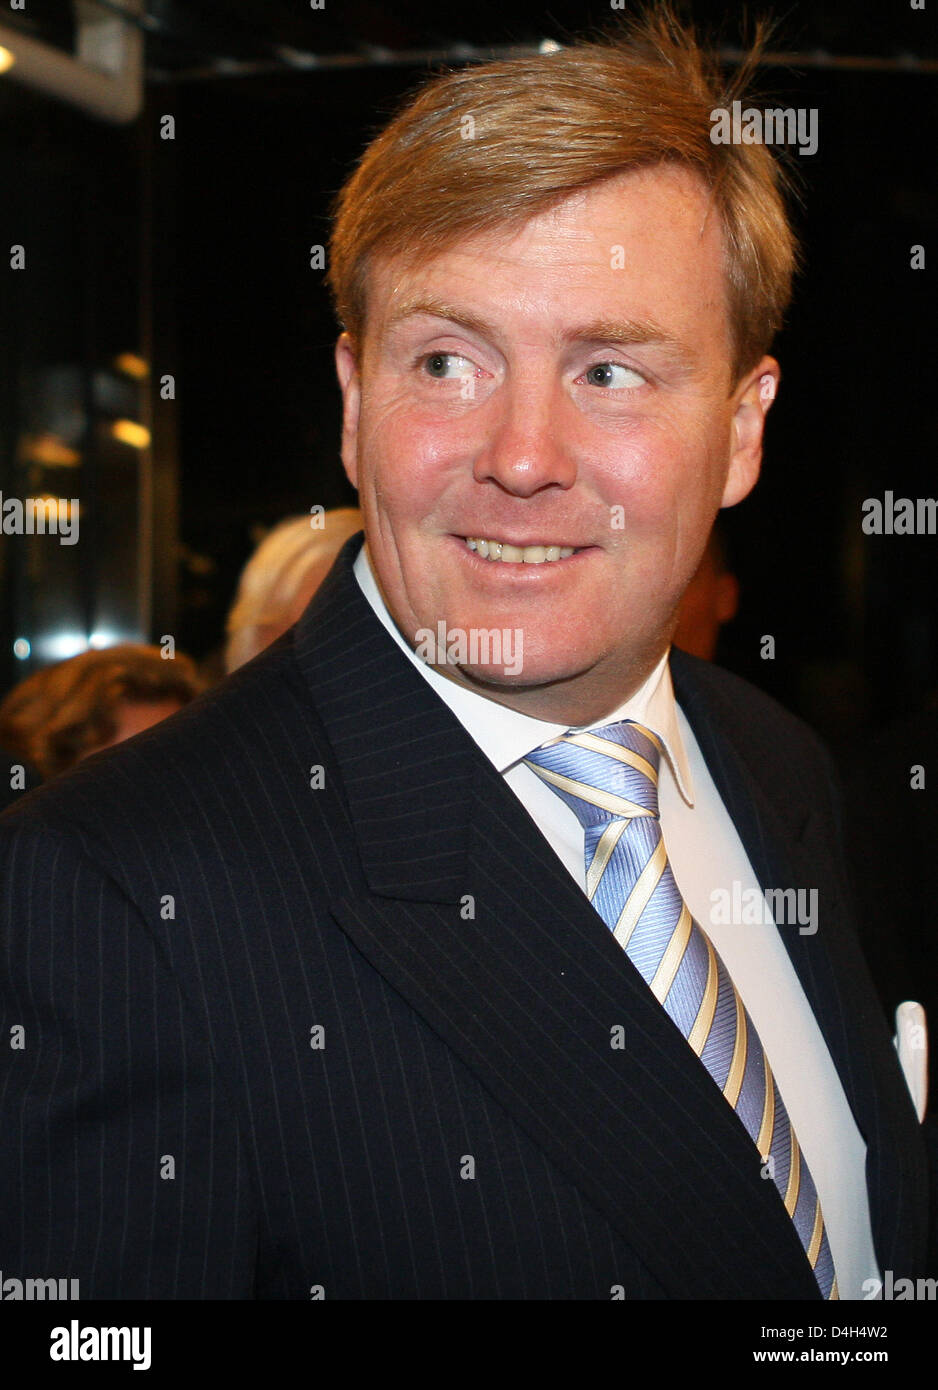 Crown Prince Willem-Alexander attends the jubilee concert of the 120 year old Royal Concertgebouworkest, a famous Dutch orchestra, in Amsterdam, Netherlands, 24 October 2008. Photo: Patrick van Katwijk Stock Photo